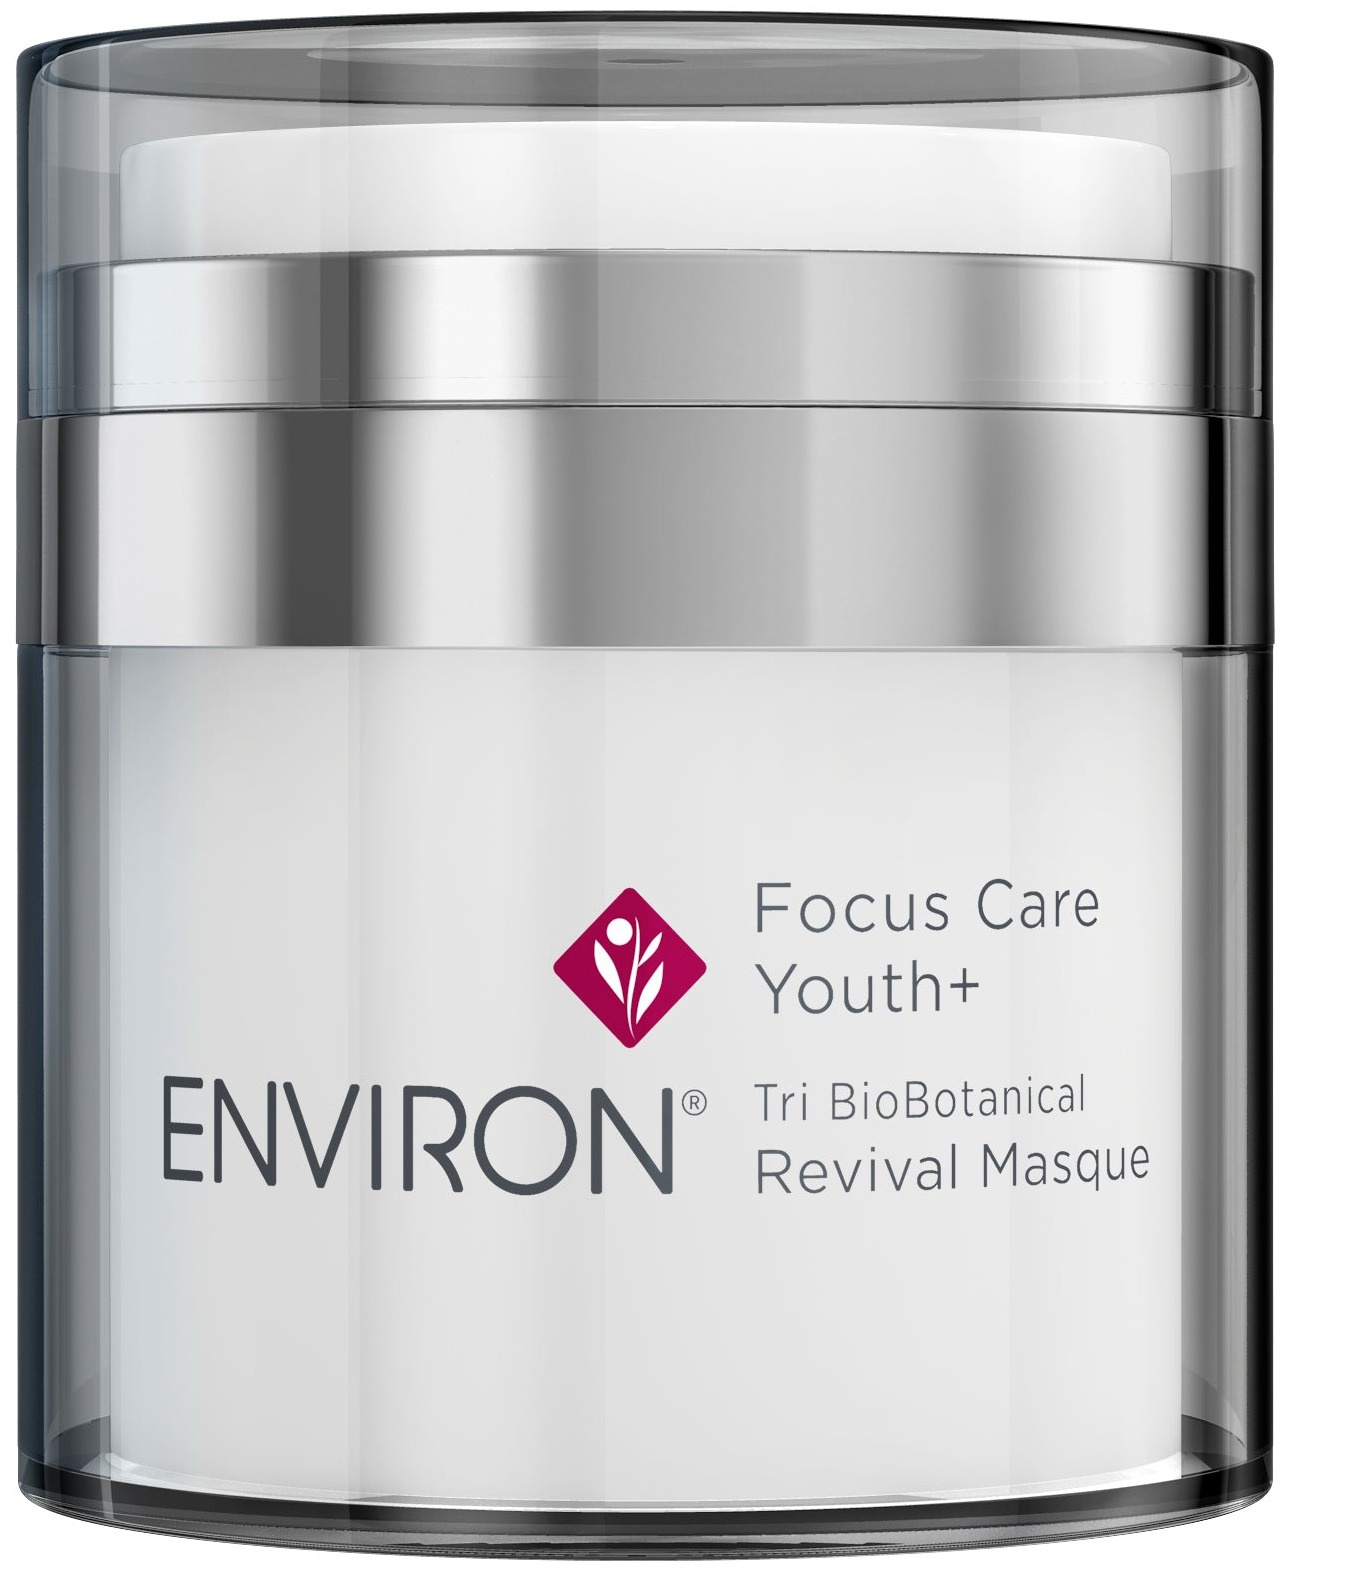 Environ Focus Care Youth+ Tribiobotanical Revival Masque